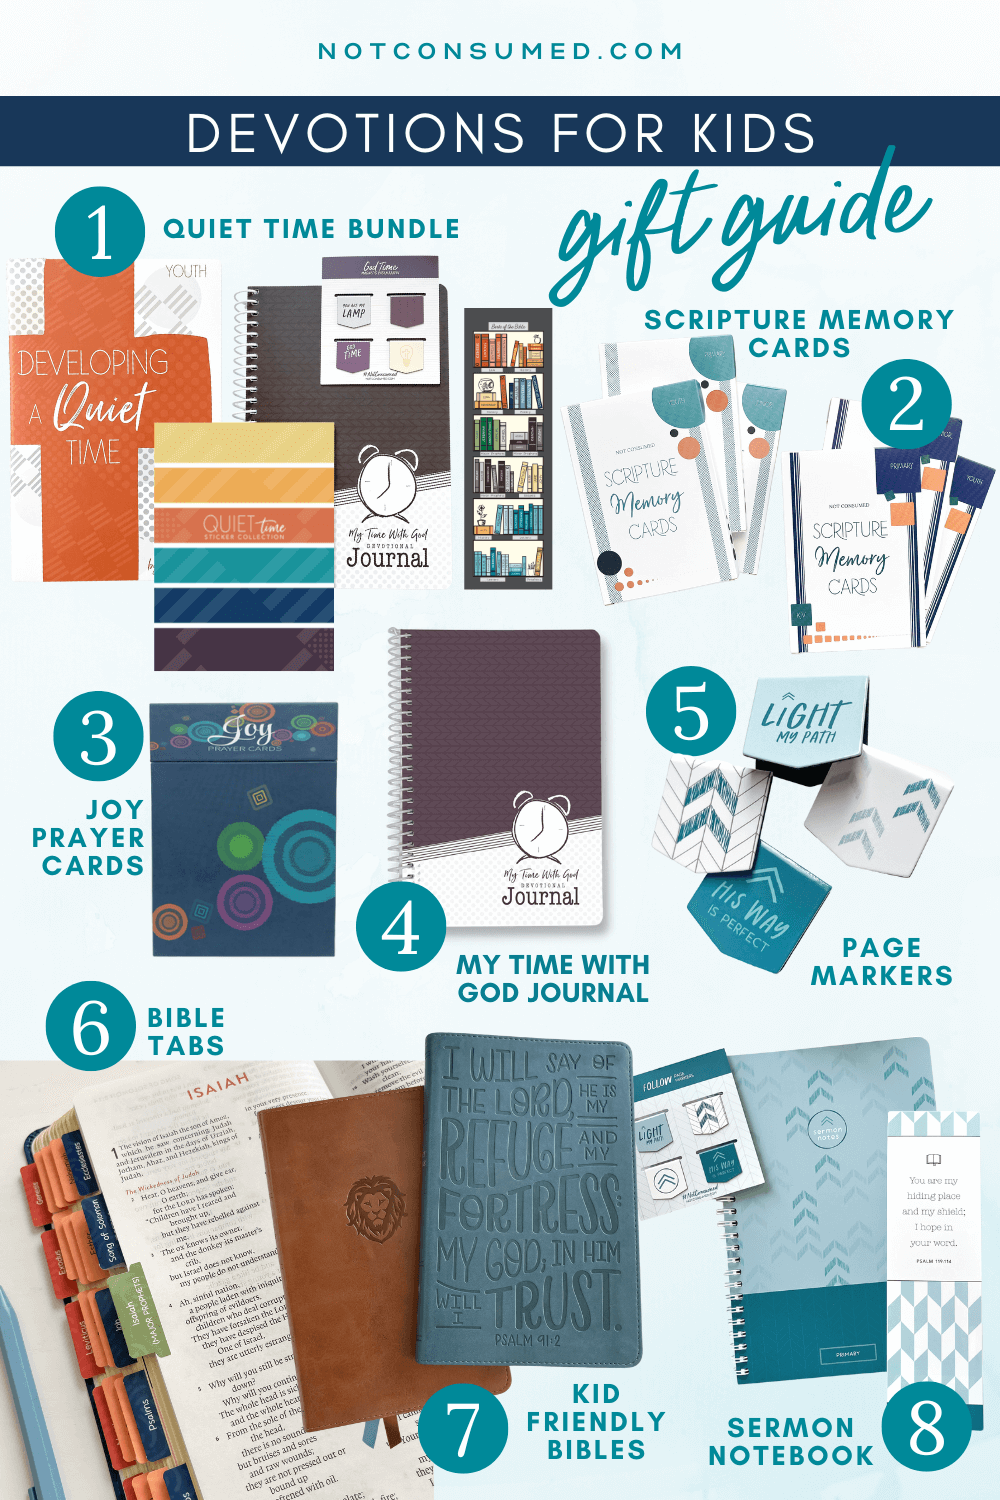 Devotions for kids gift guide